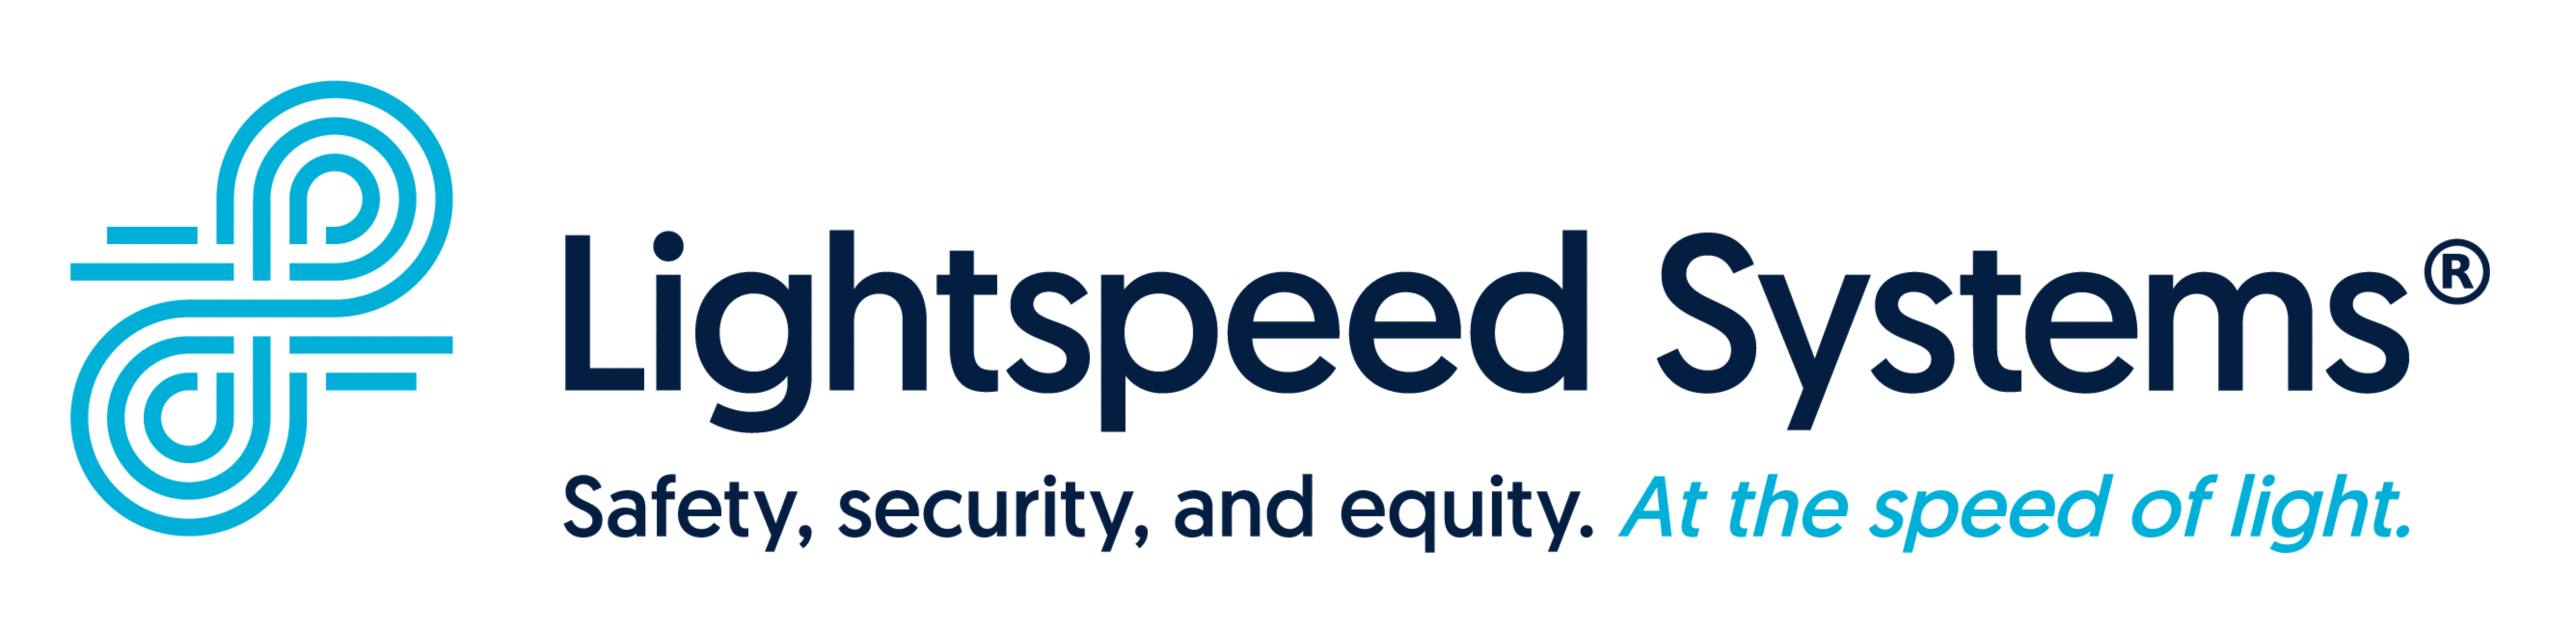 Lightspeed Systems - Safety, Security and Equity. At the speed of light.